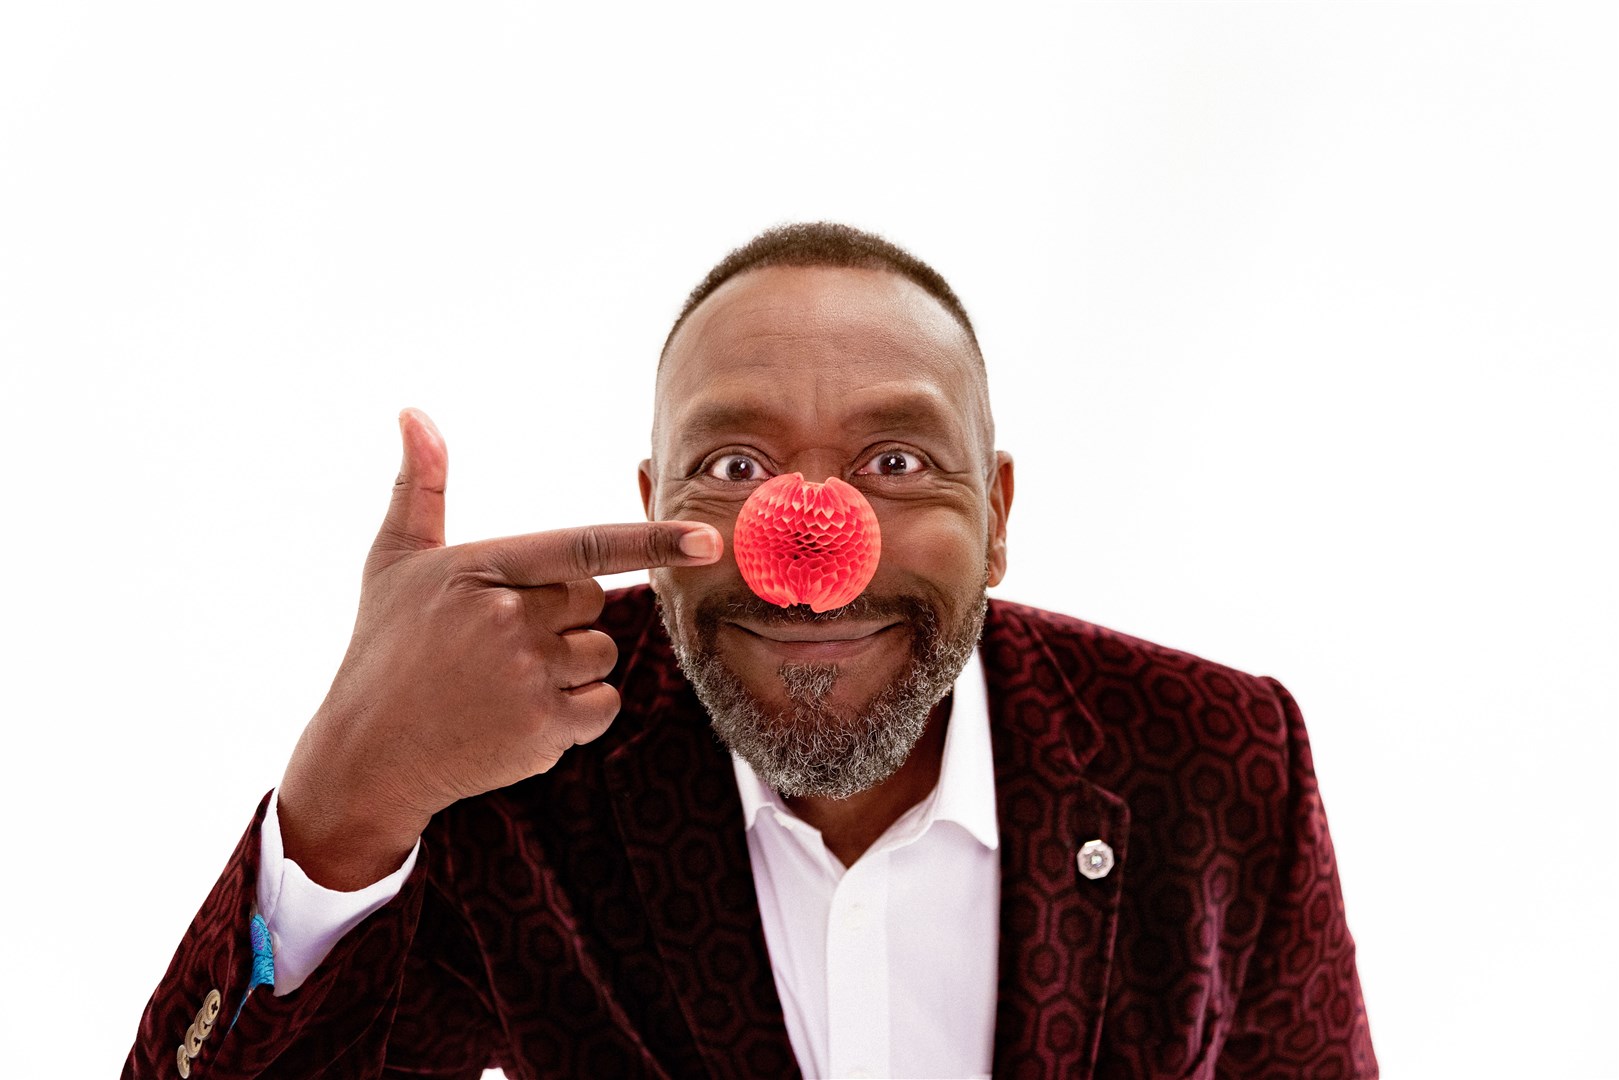 Sir Lenny Henry sporting the new transforming red nose, in support of Red Nose Day 2023 (Richard Davenport/Comic Relief/PA)